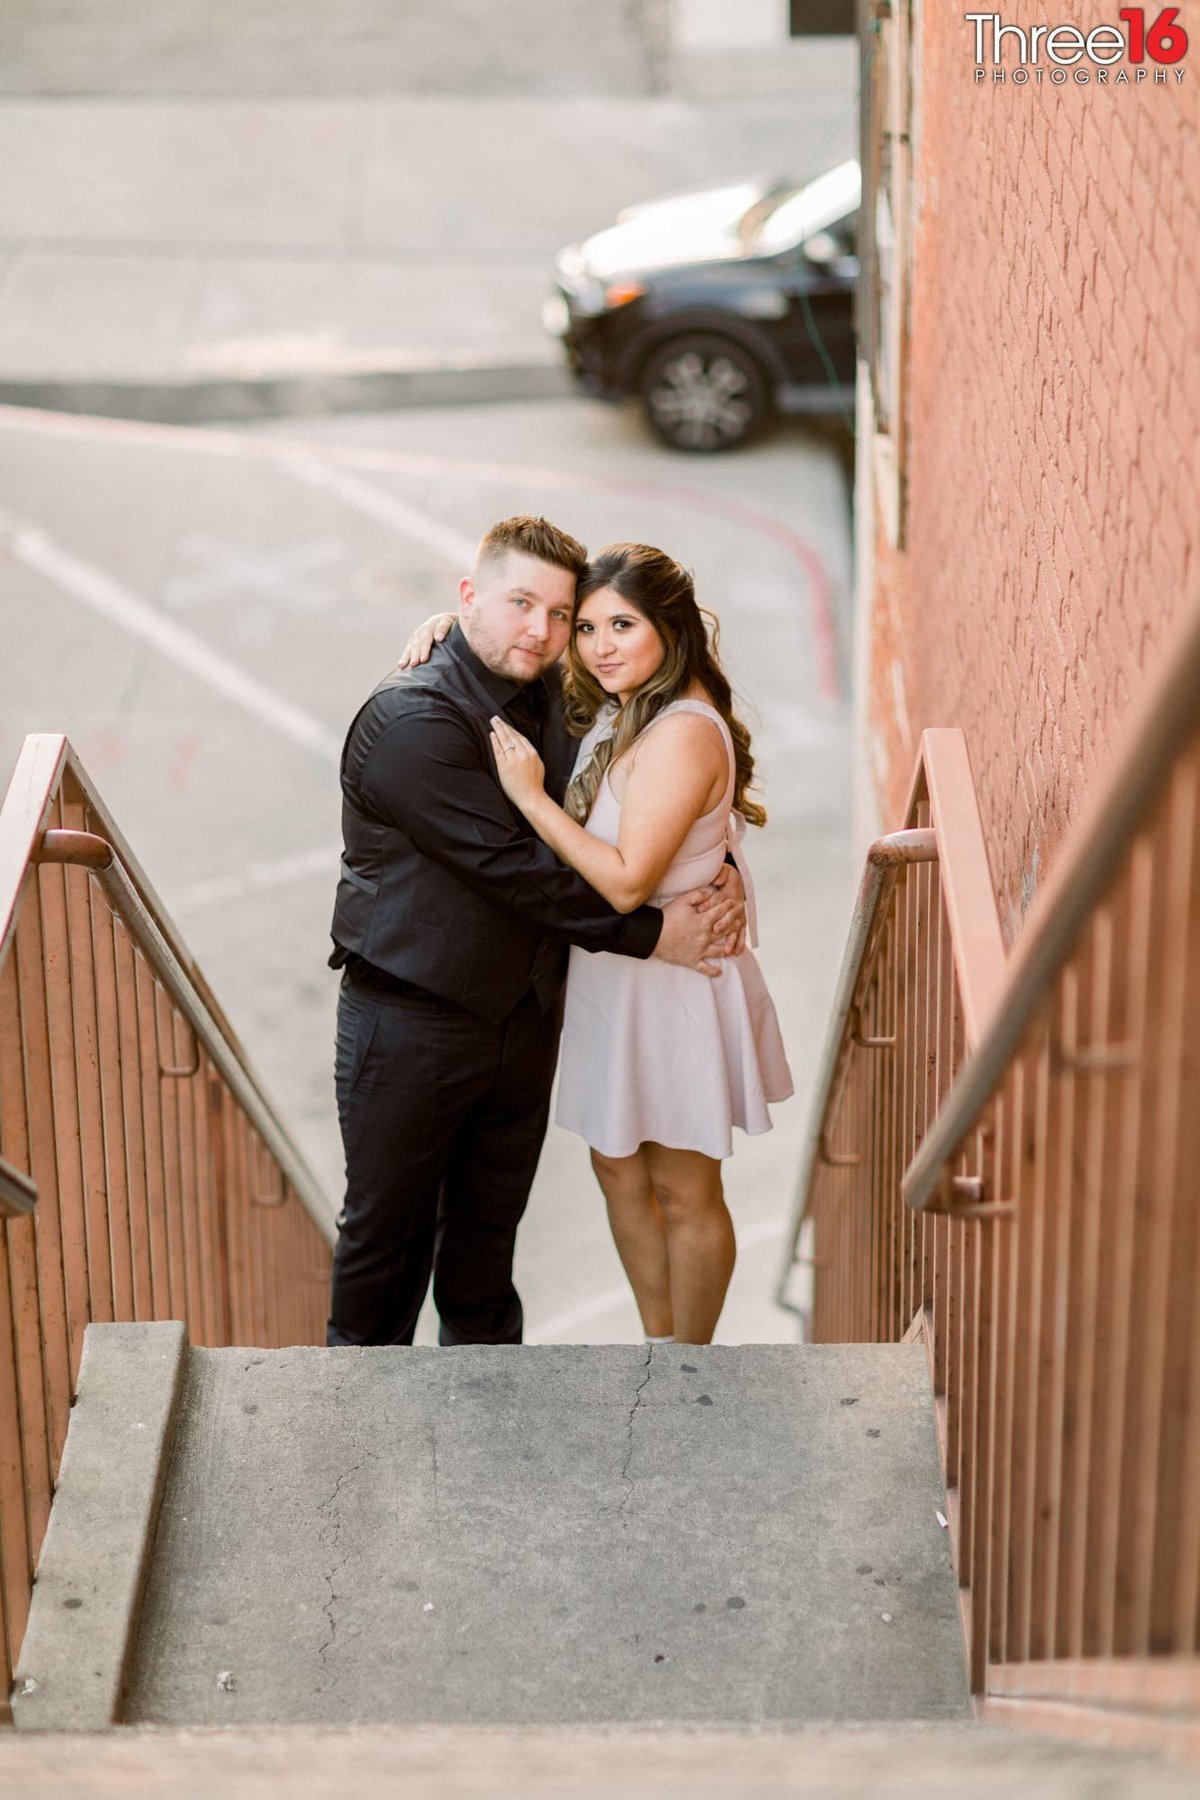 Engaged couple embrace while standing on an outdoor stairwell